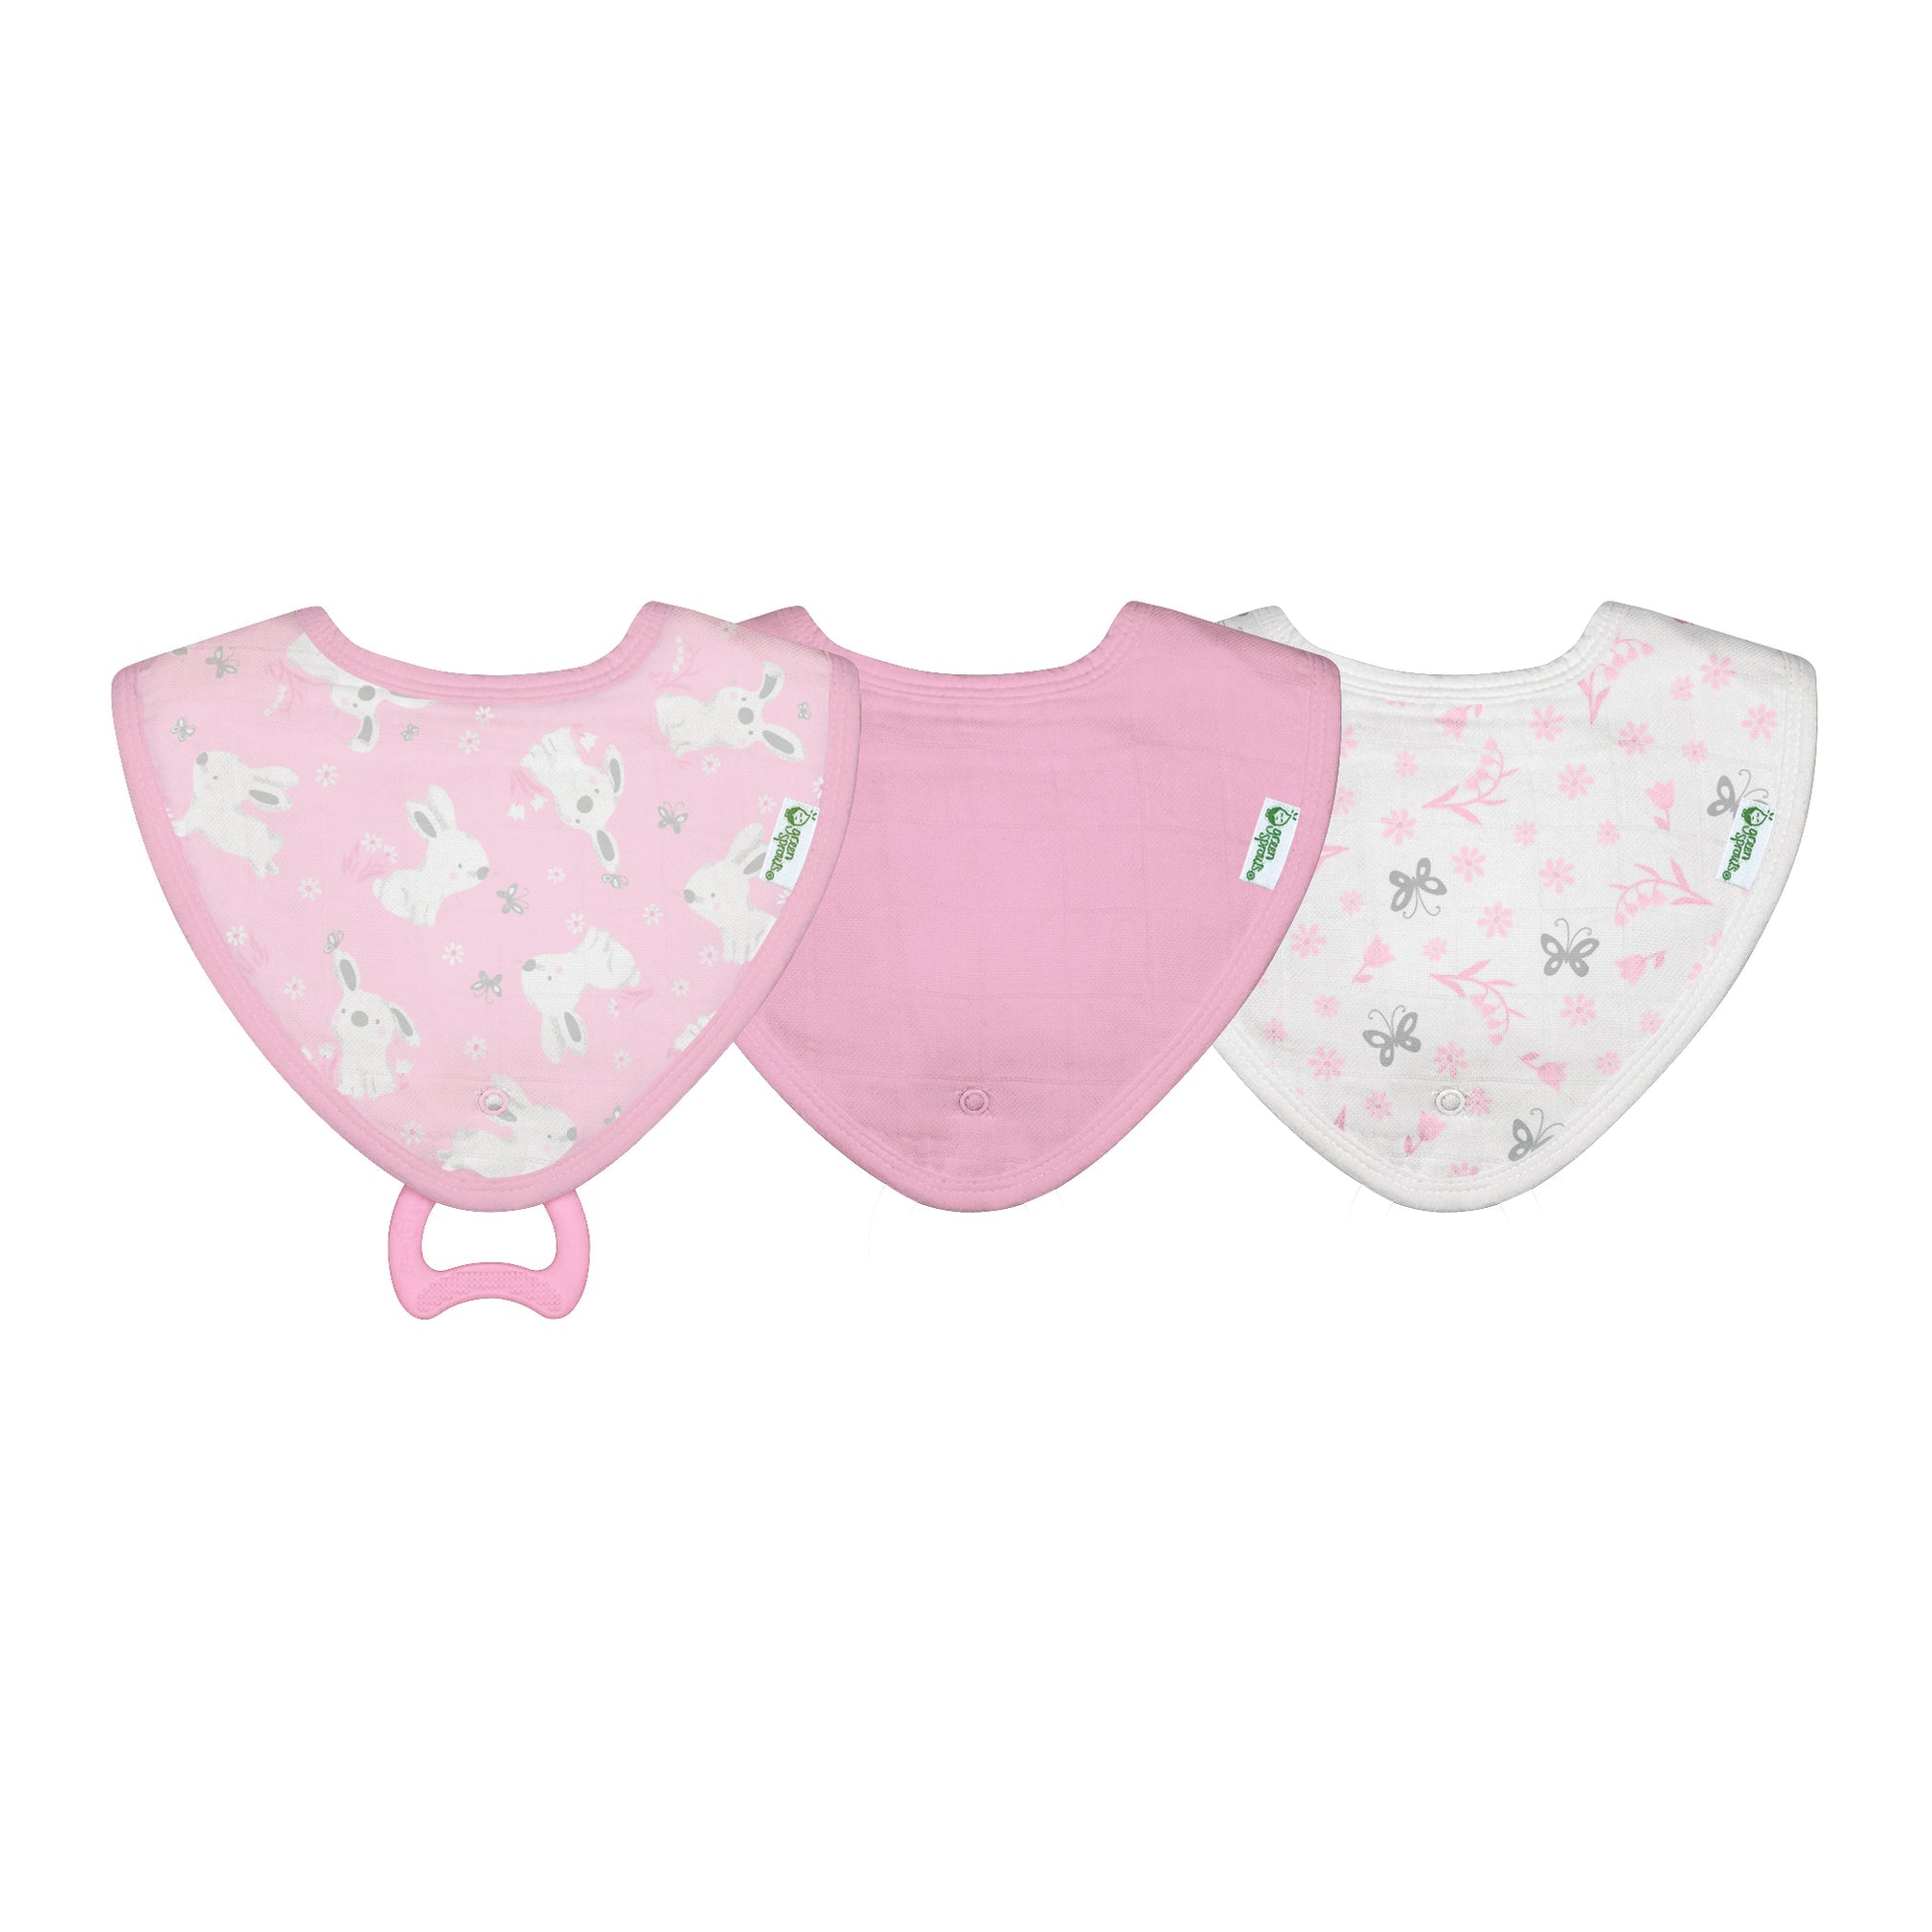 Muslin Stay-dry Teether Bibs made from Organic Cotton (3 pack)